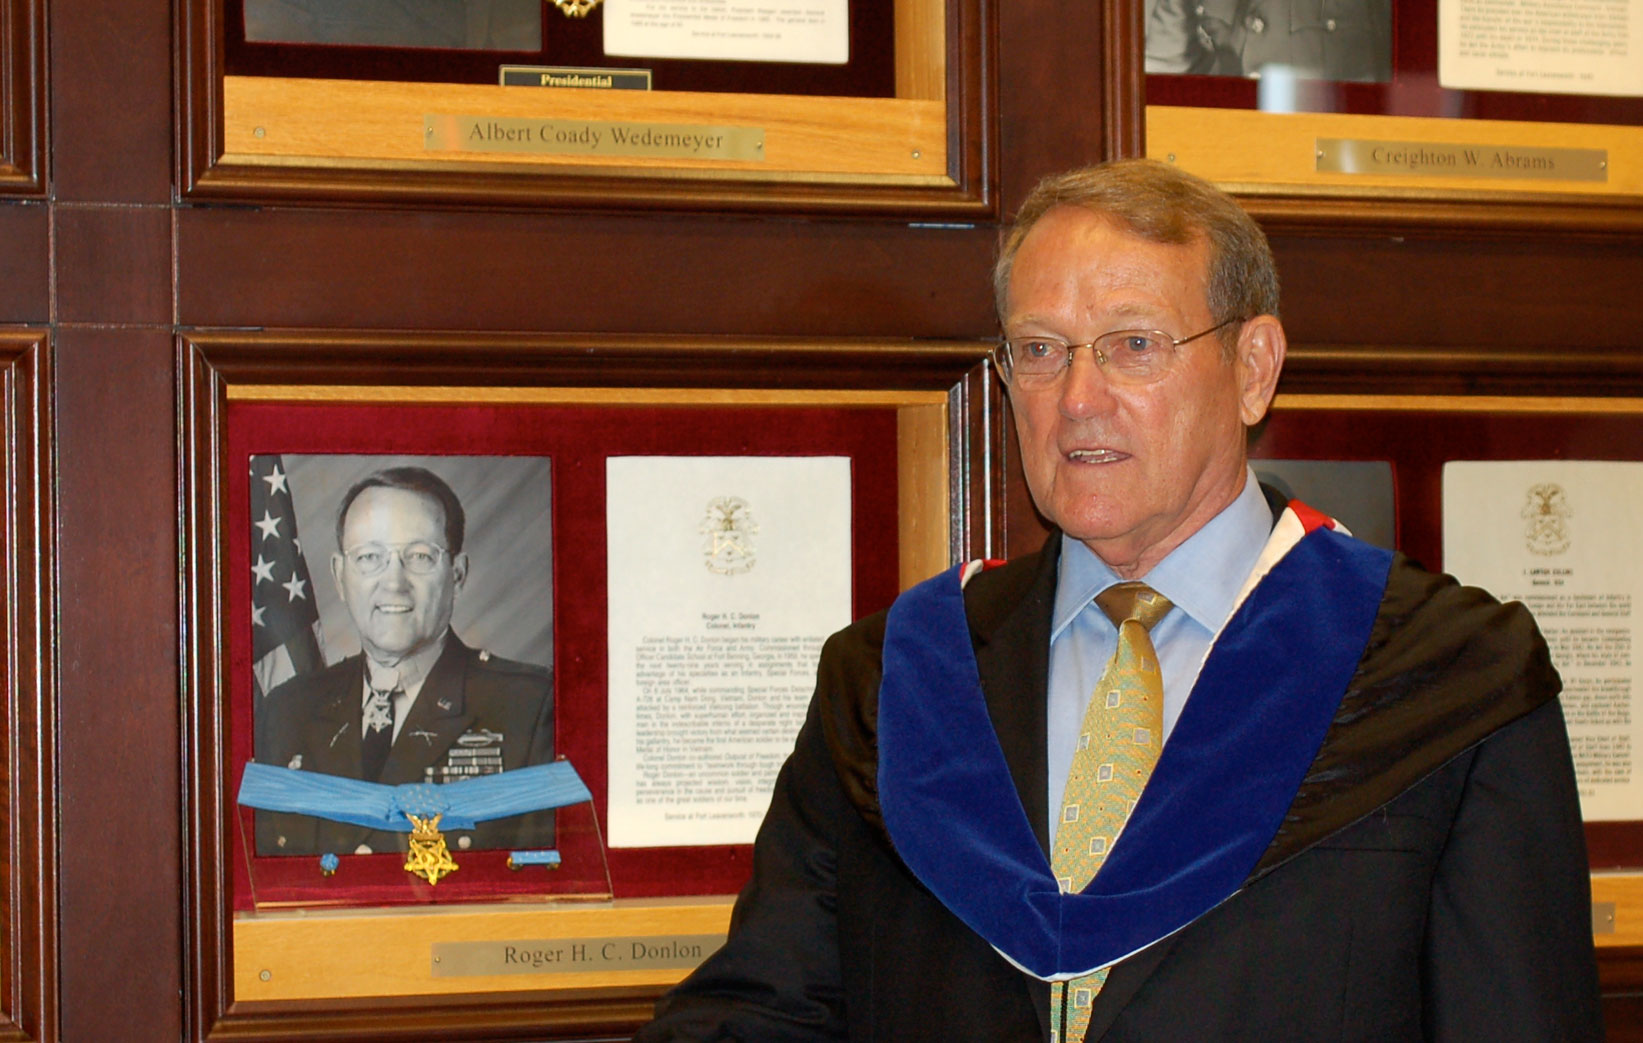 After the Aug. 11, 2008, ceremony in which he gifted his Medal of Honor to the College, Col. (Ret.) Roger Donlon poses for a photo in front of his Fort Leavenworth Hall of Fame shadow box in the atrium of the Lewis and Clark Center.